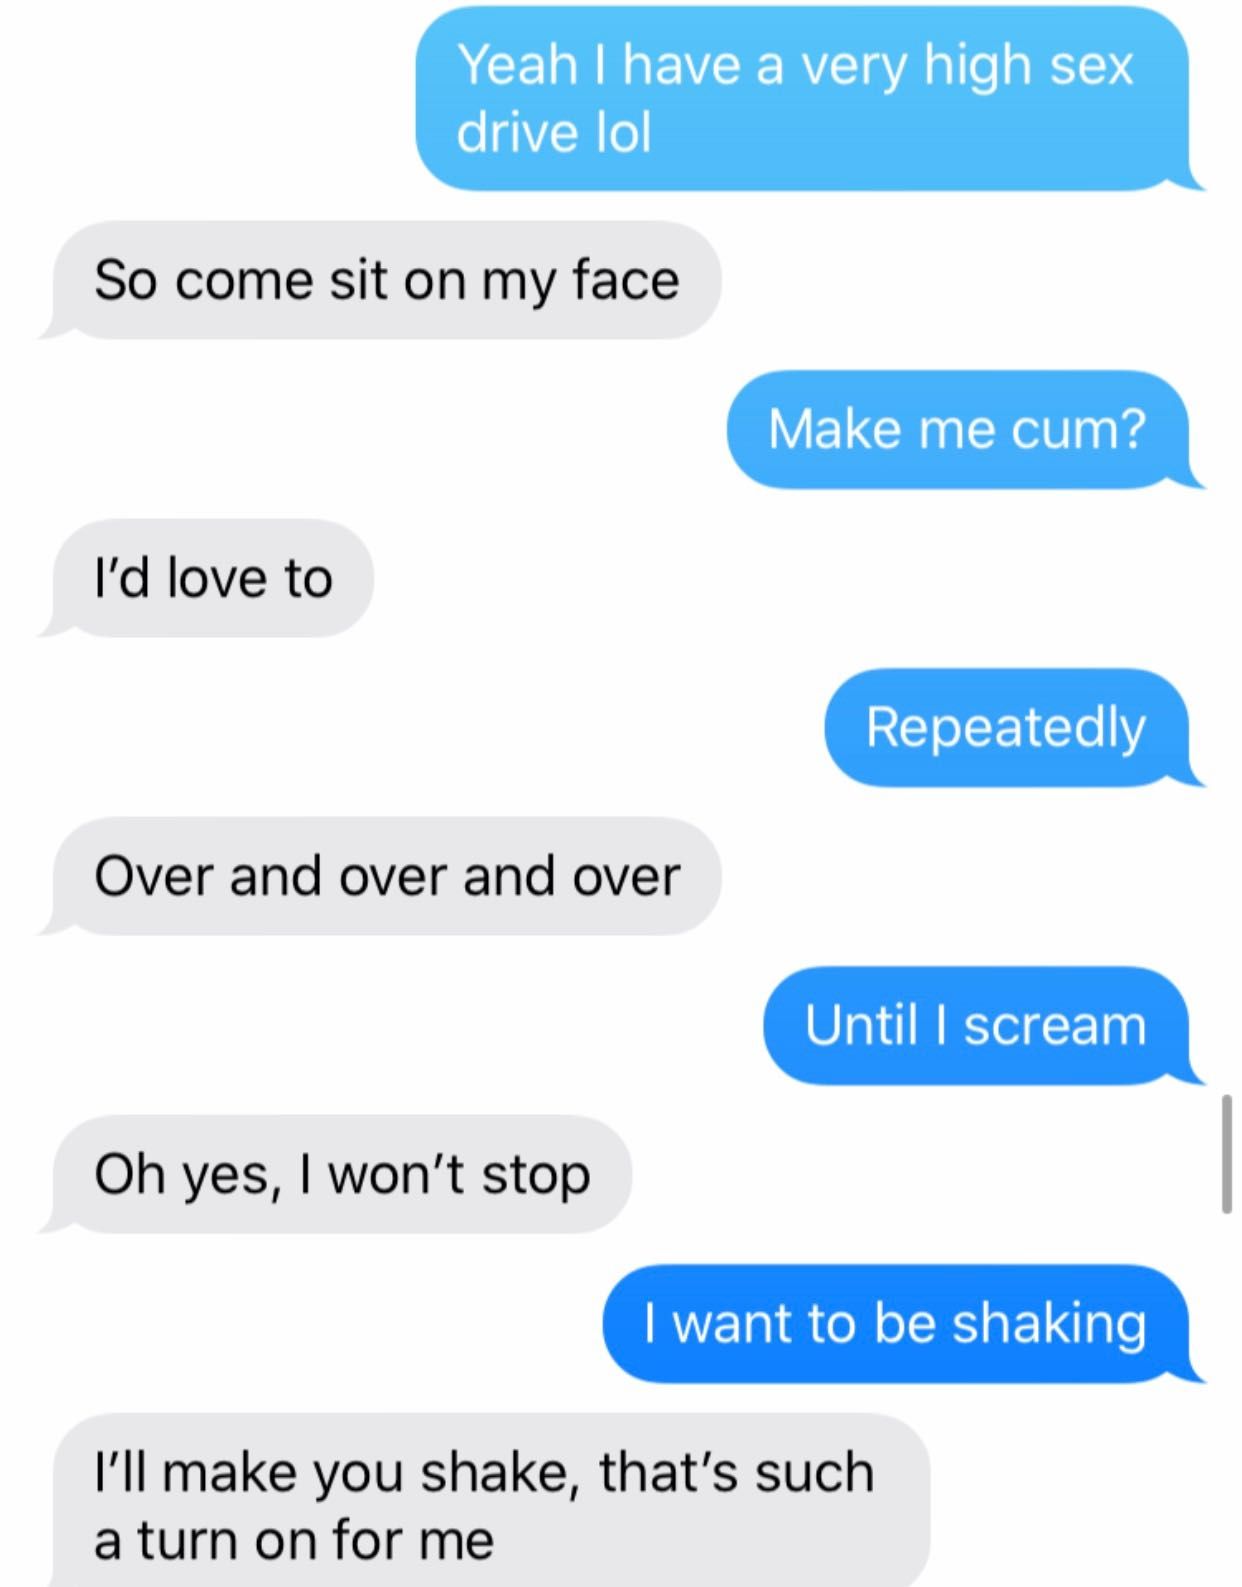 60 Hot Sexting Ideas for Your Inspiration image image